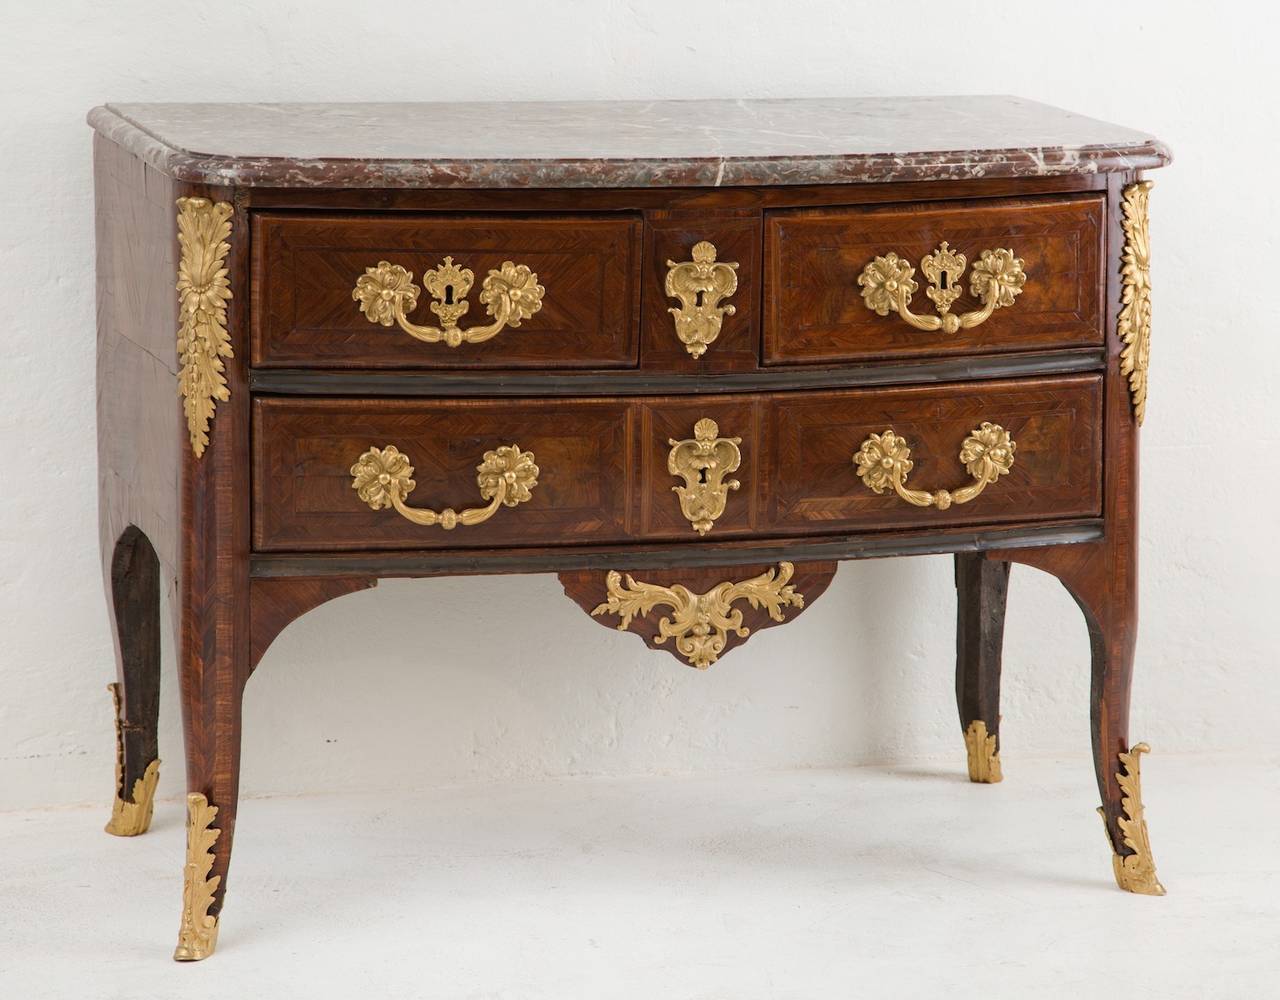 French RéGence Ormolu-Mounted Amaranth Parquetry Commode In Fair Condition For Sale In Banksmeadow, NSW